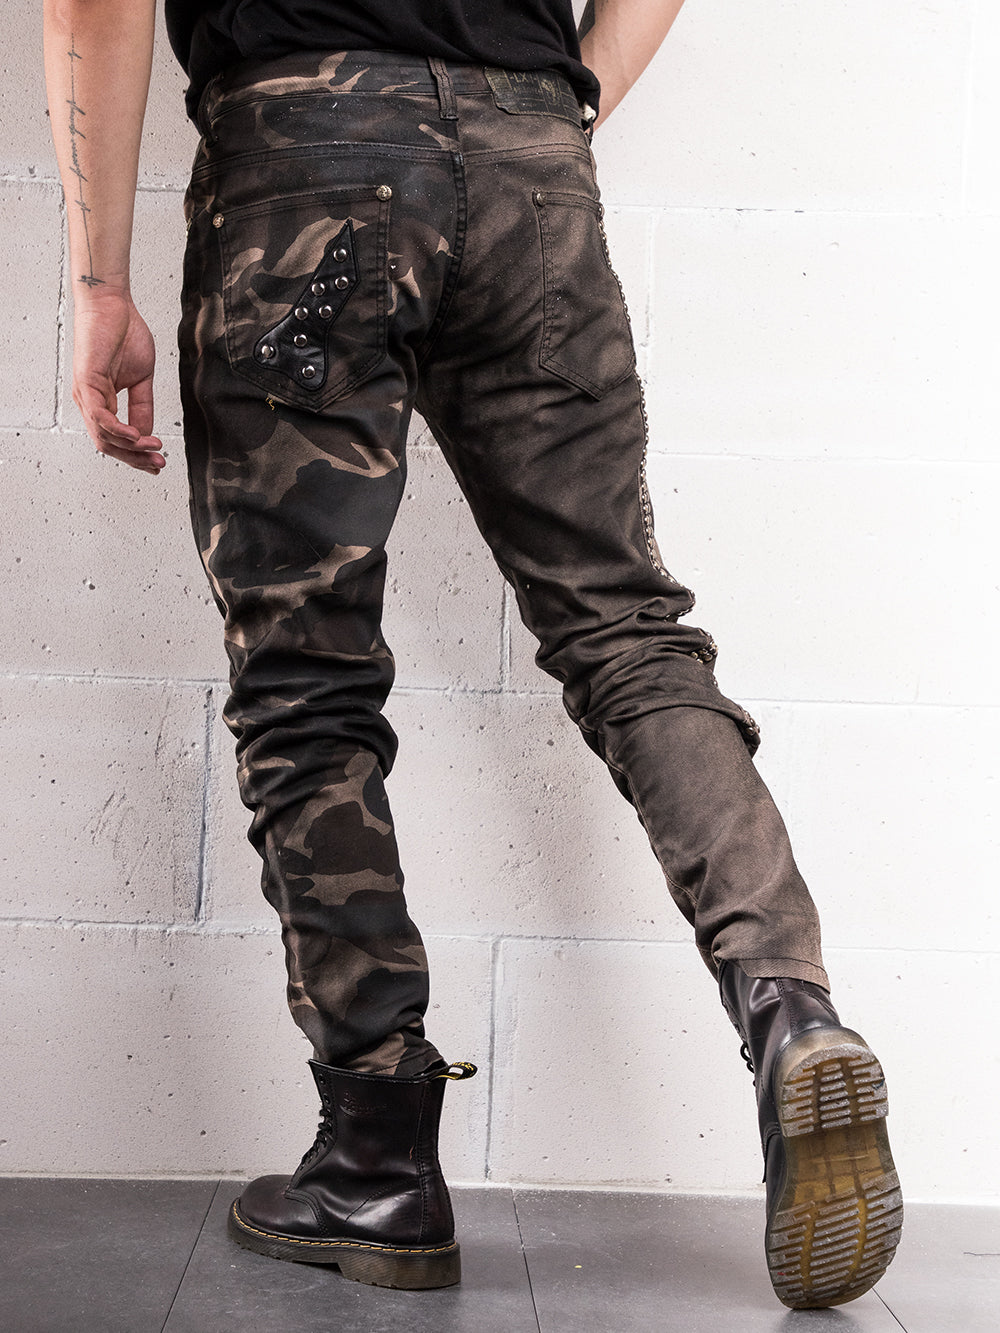 A man wearing a pair of hand-crafted SNIPER camouflage jeans with elastic fabric, standing against a wall.